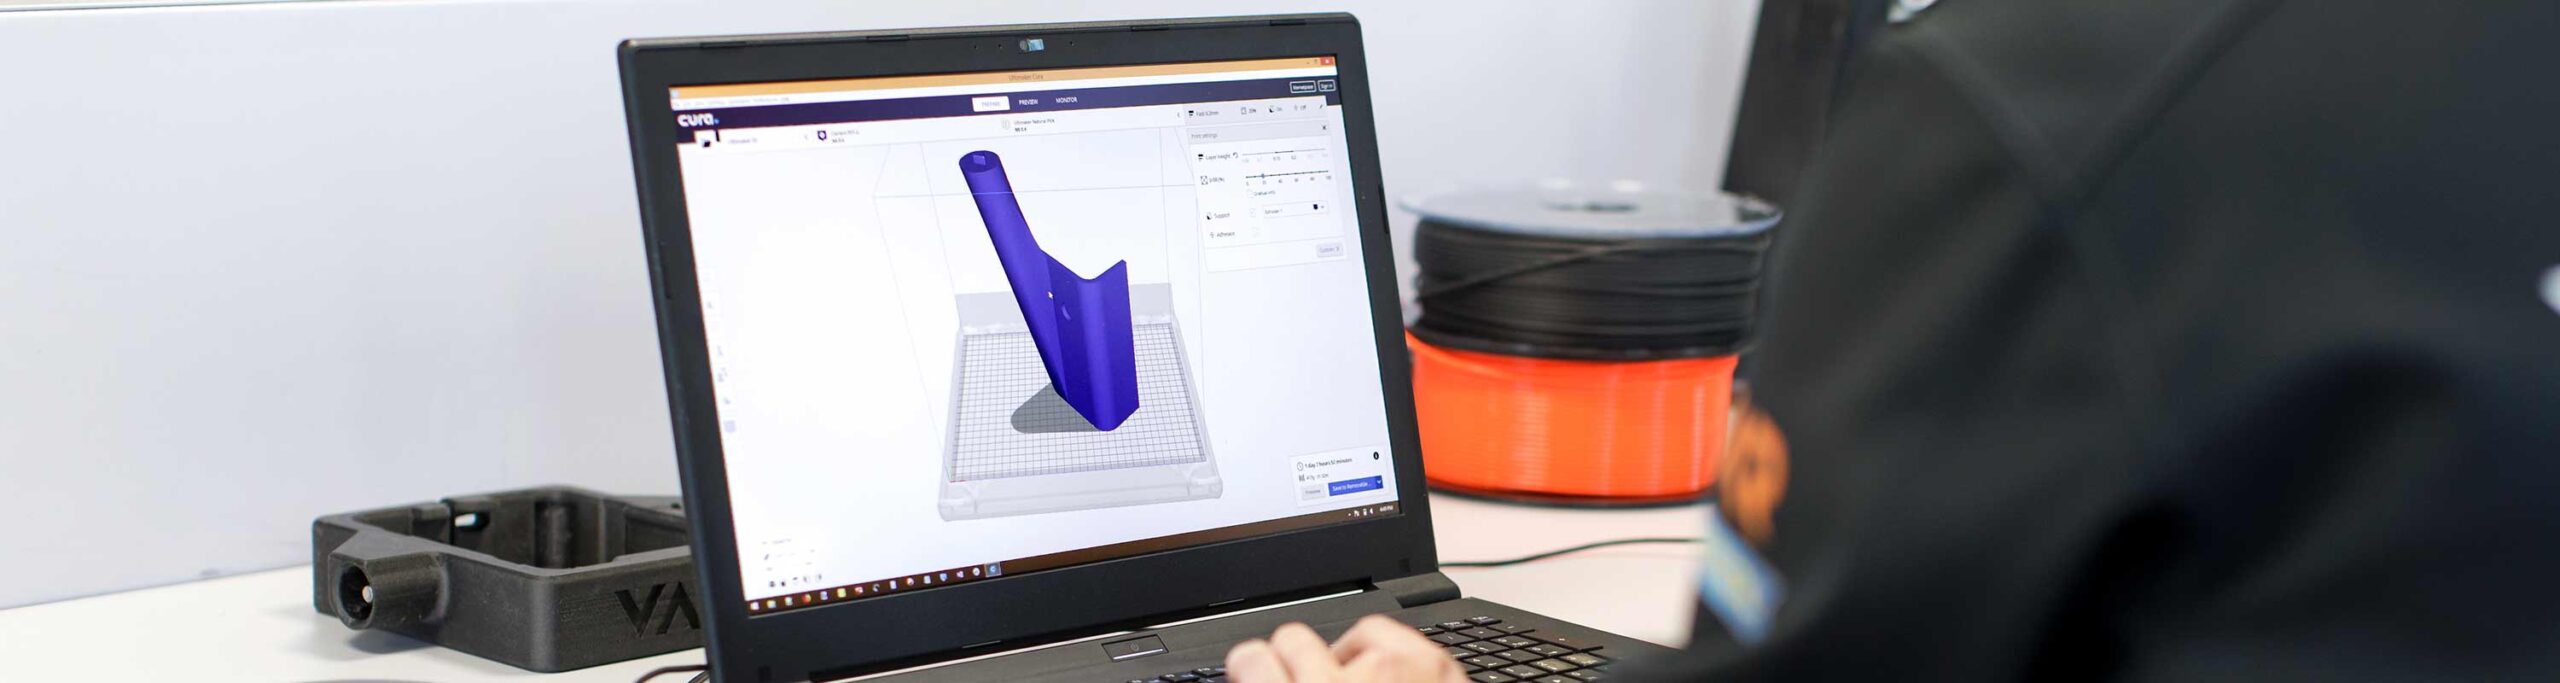 Using Ultimaker Cura 3D printing software